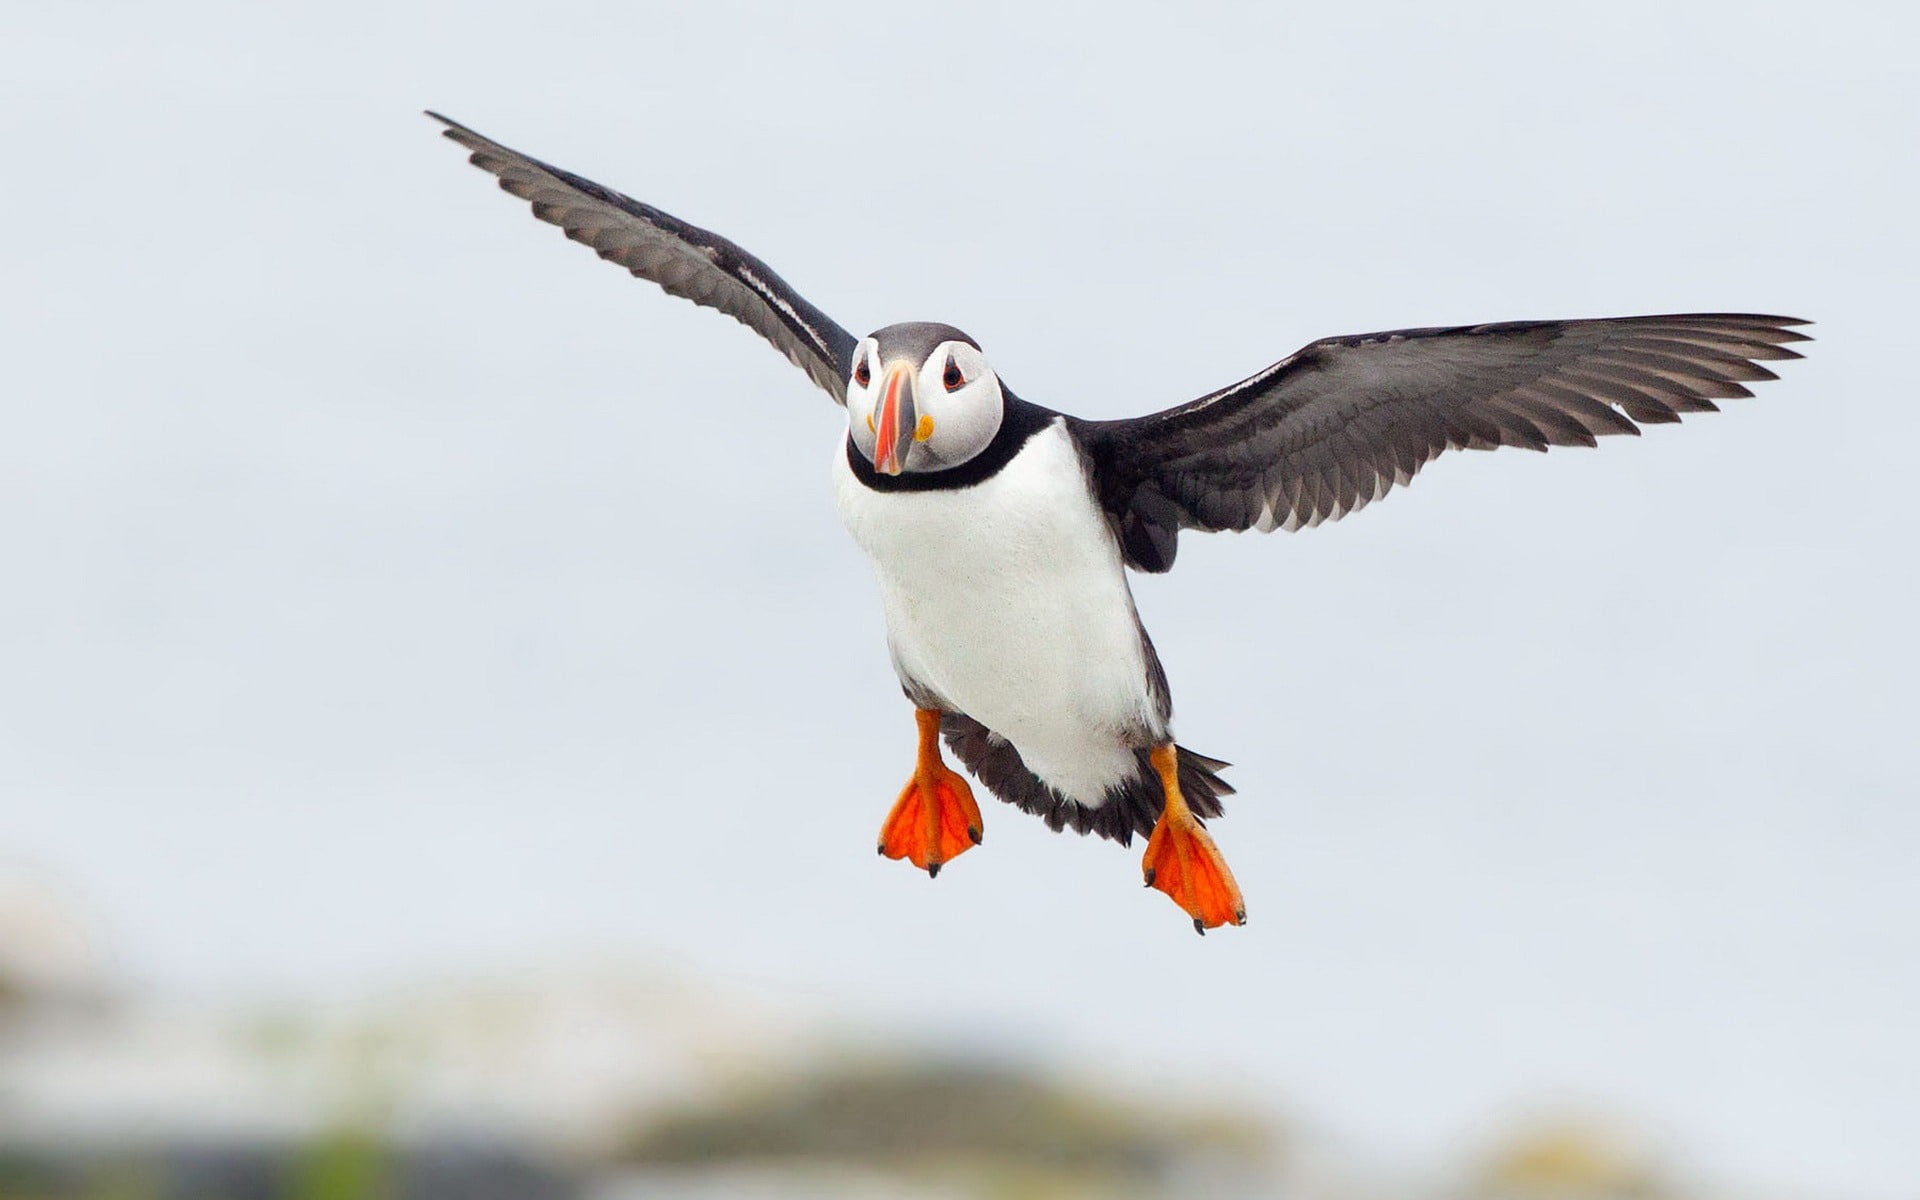 Cute Elf puffin bird photography wallpaper 05, white and white Atlantic puffin